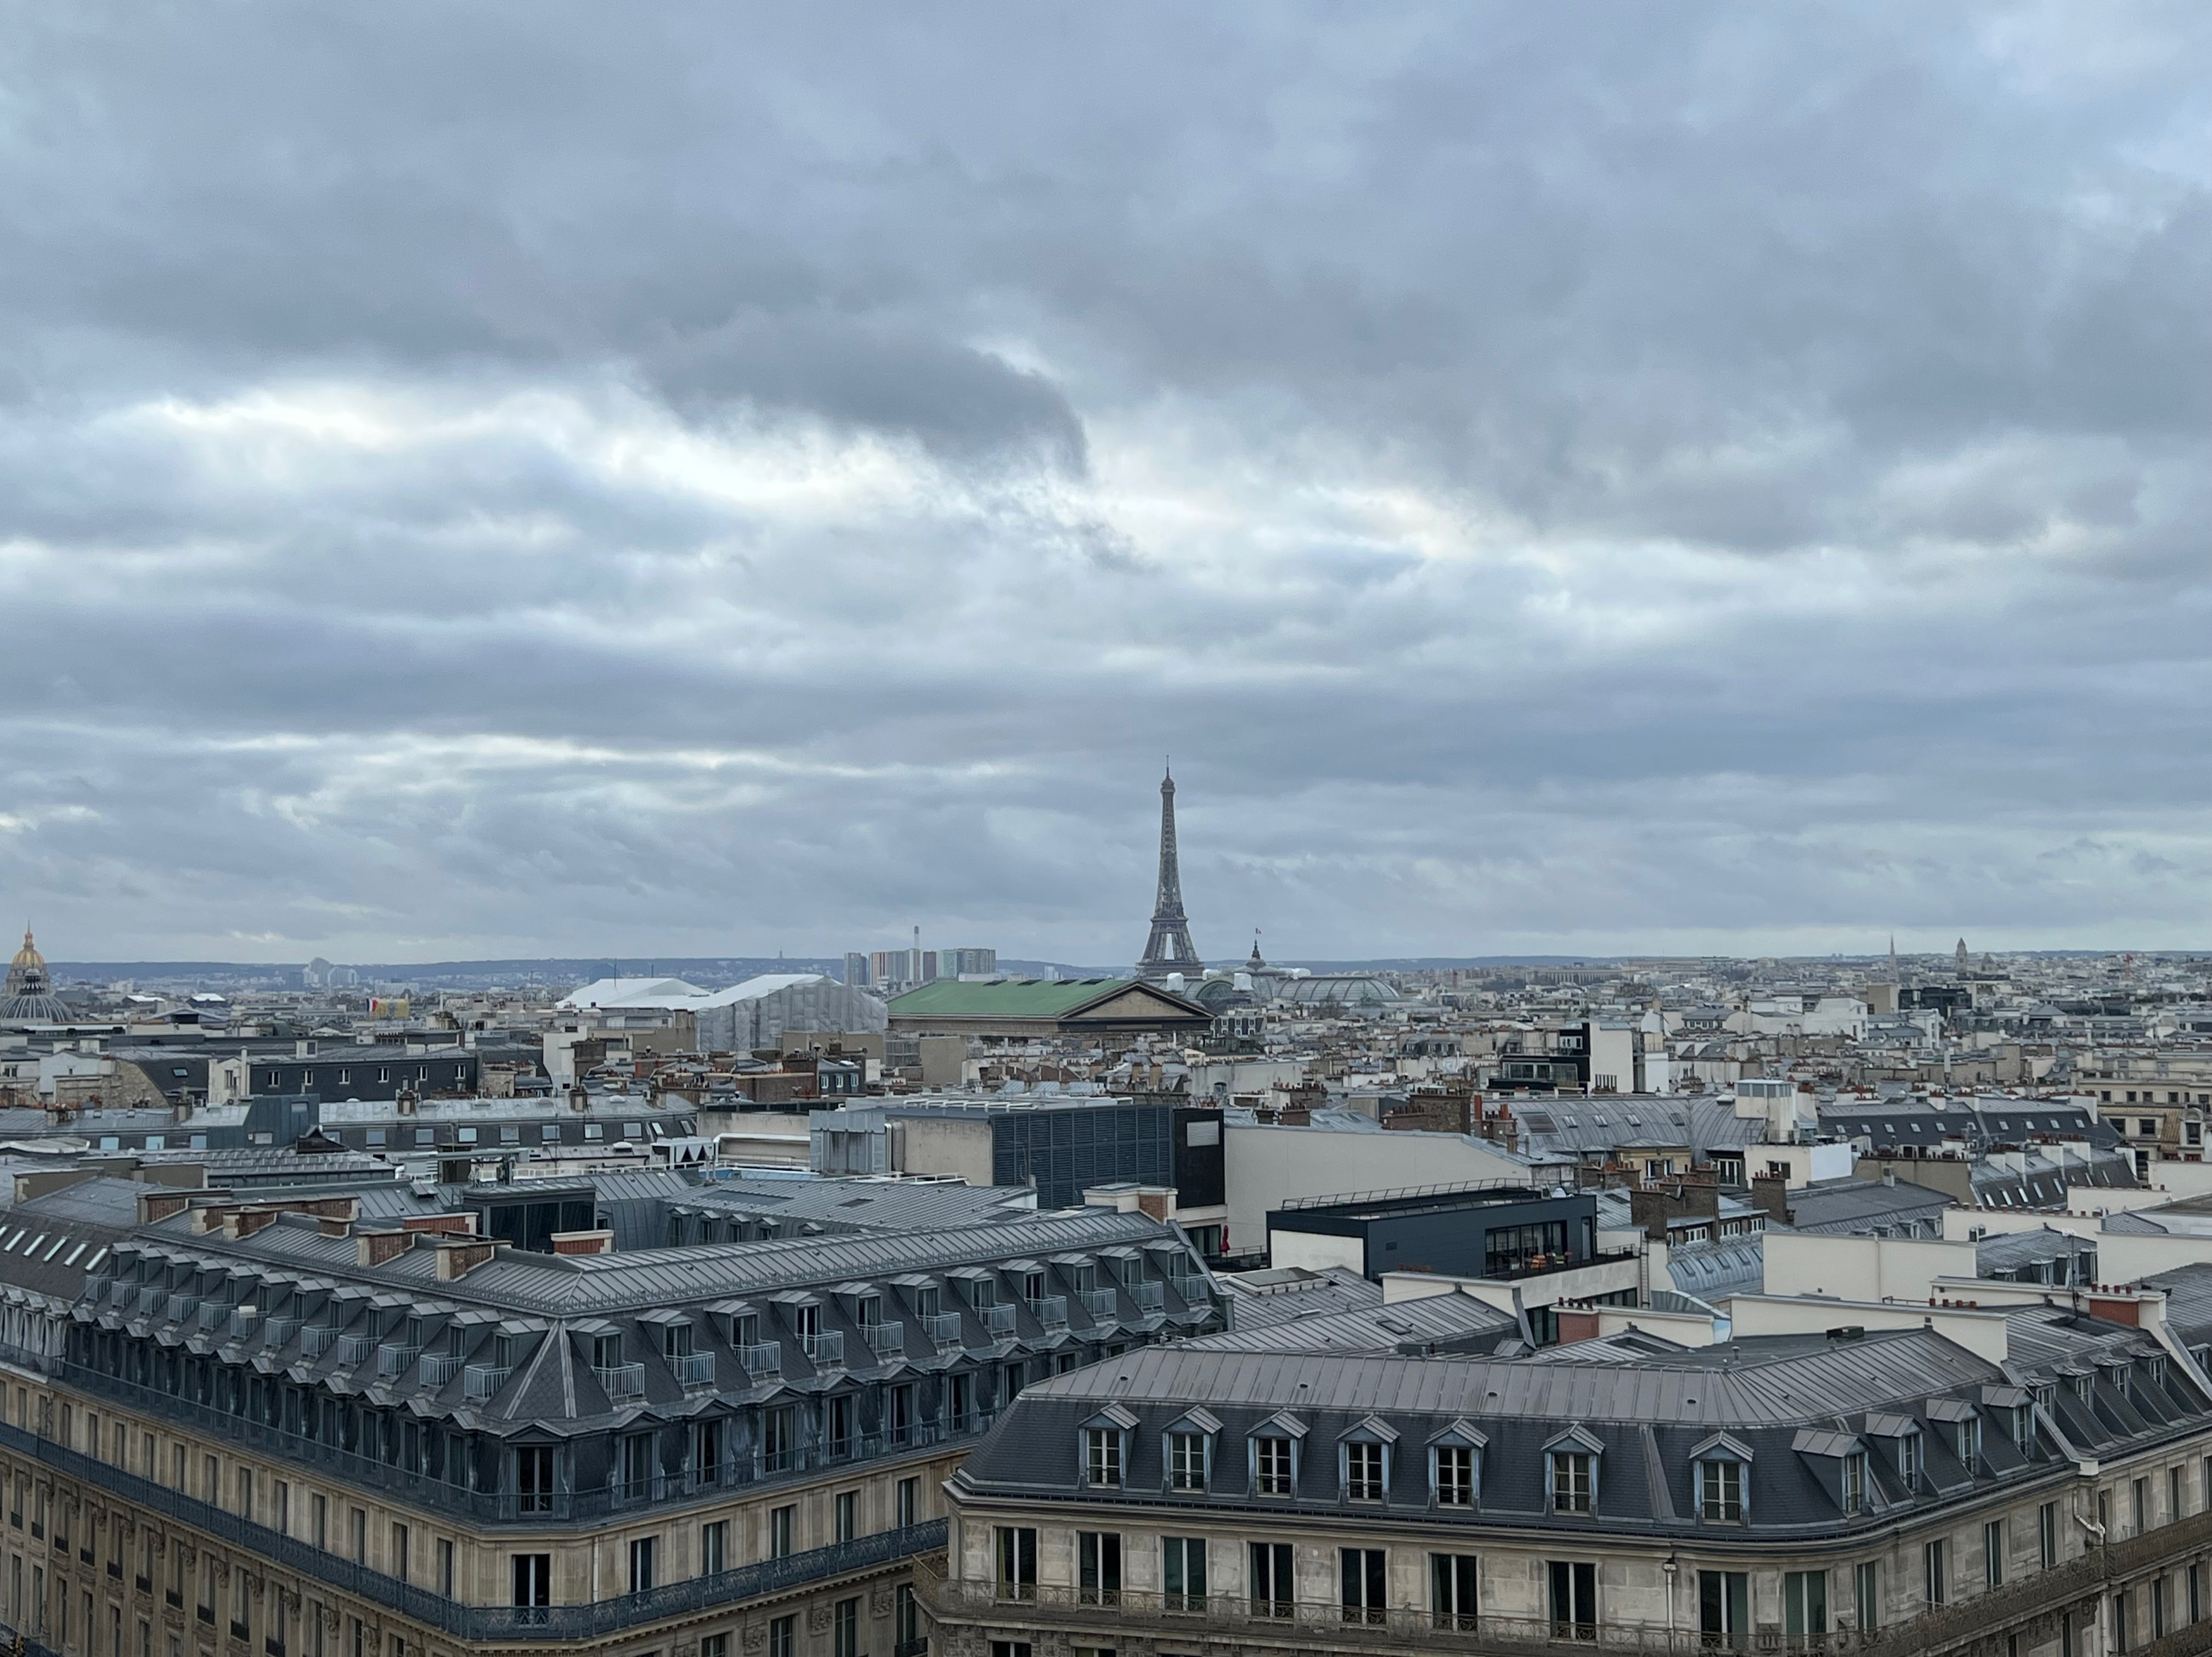 View towards the Eiffel Tower from Galeries Lafayette